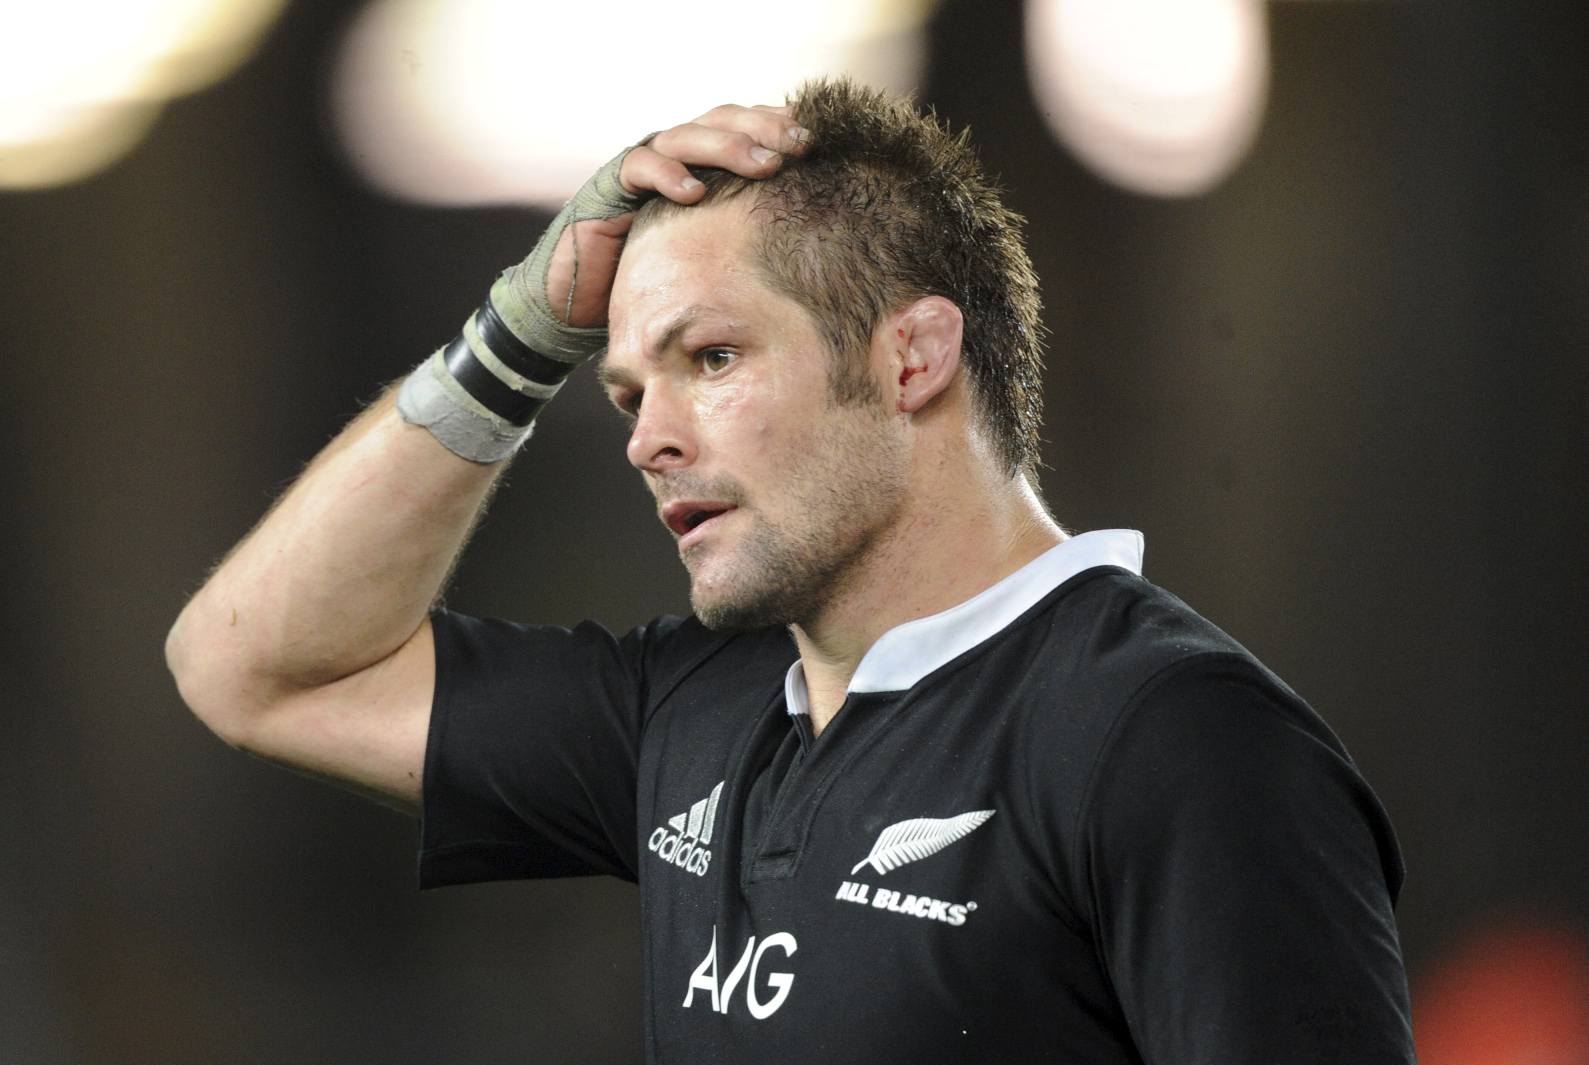 Richie McCaw has played 132 times for the All Blacks, one less than the legendary Colin Meads. Photo: AP